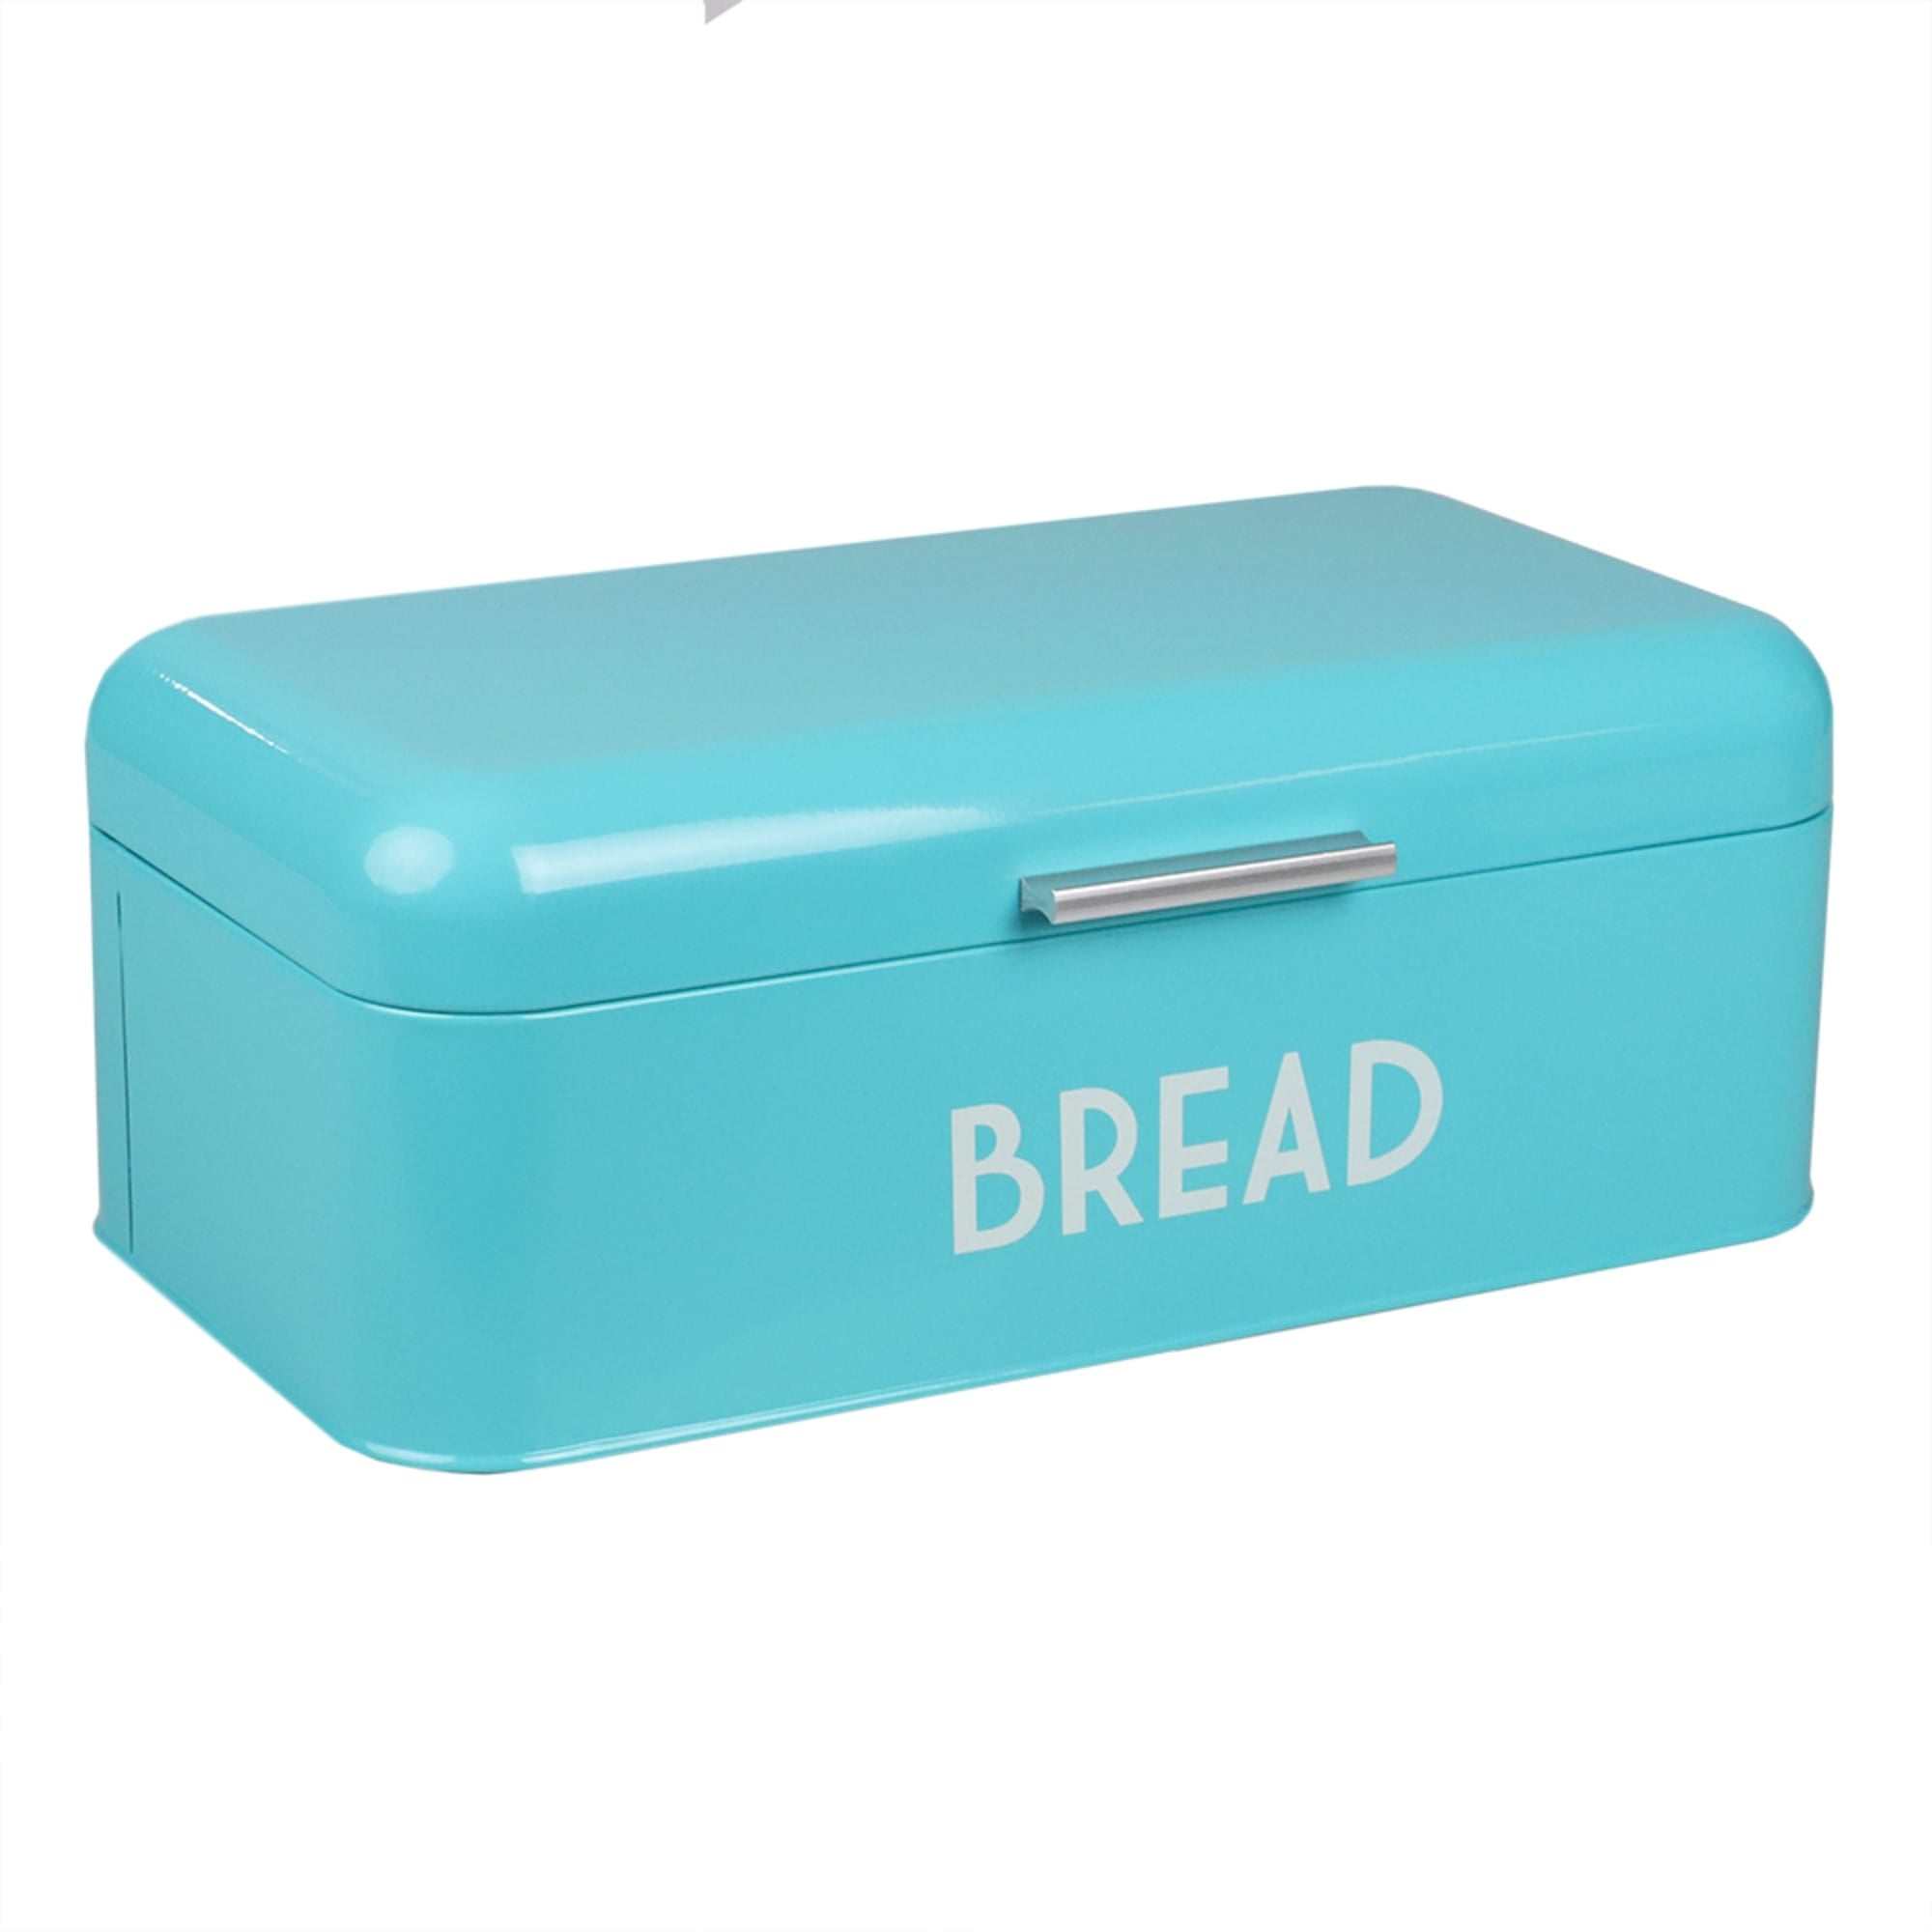 Home Basics  Metal Bread Box, Turquoise $25.00 EACH, CASE PACK OF 4